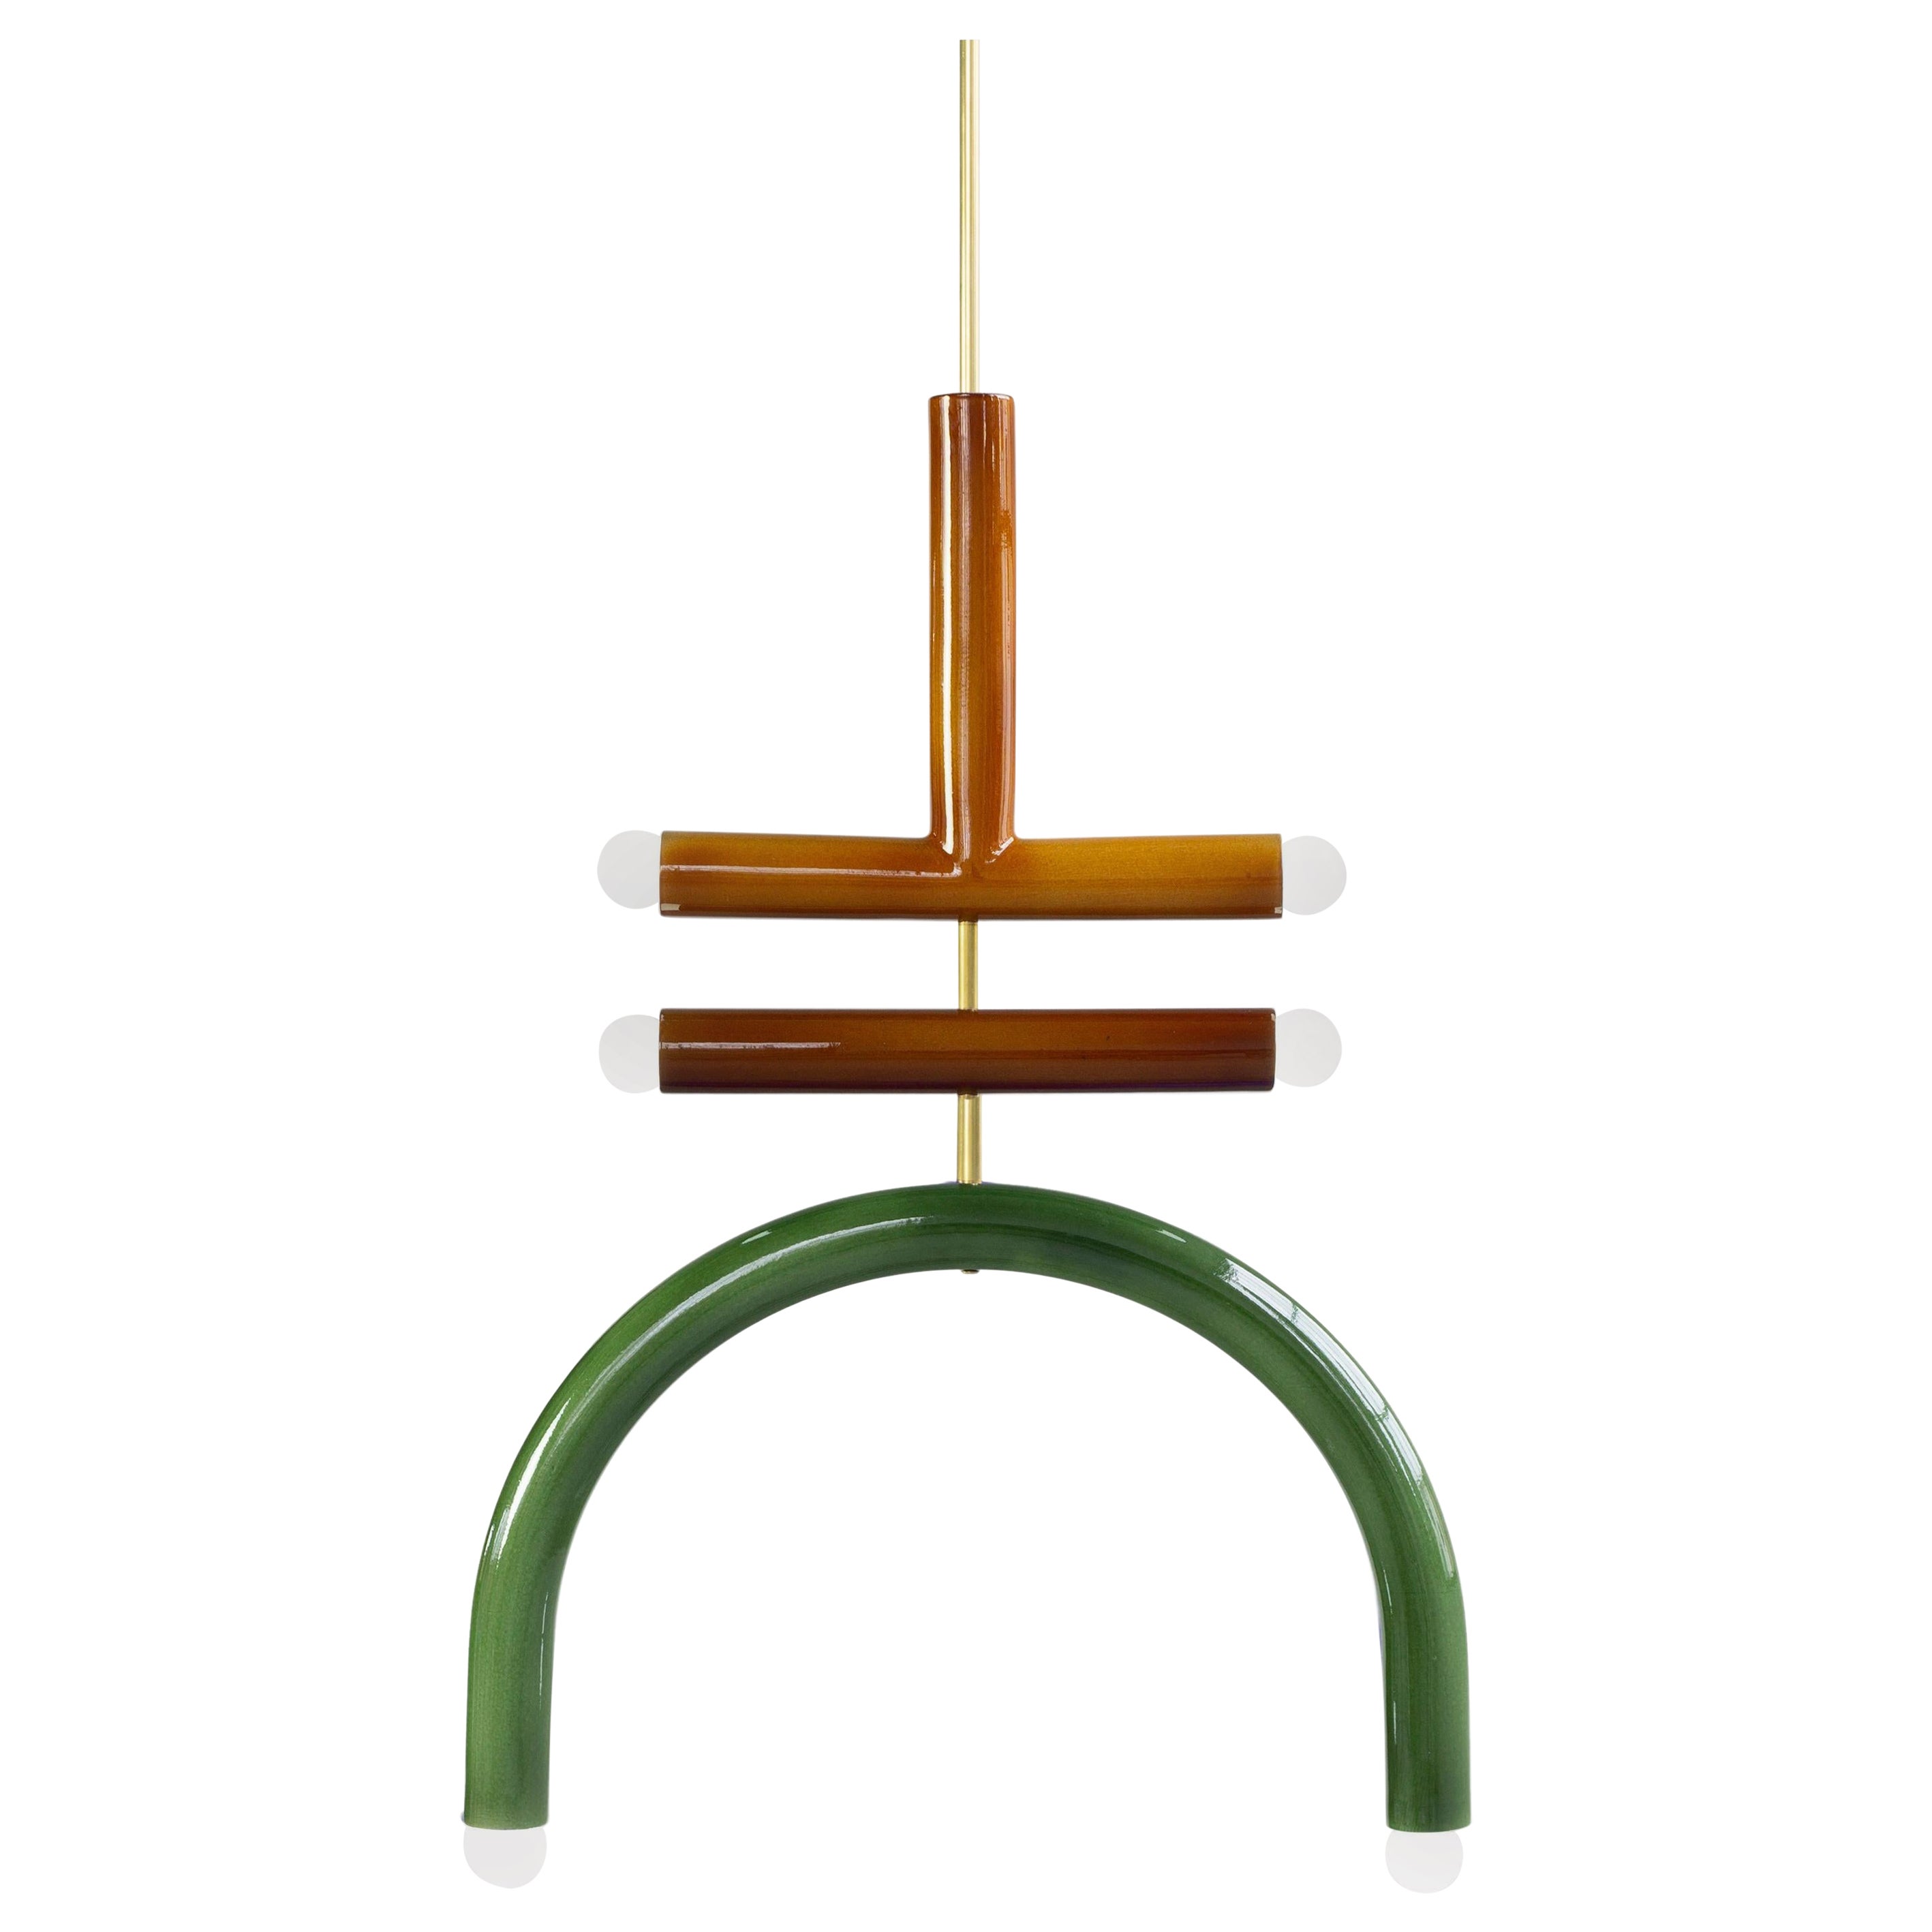 TRN F2 Pendant lamp / ceiling lamp / chandelier 
Designer: Pani Jurek

Dimensions: H 82.5 x 55 x 5 cm
Bulb (not included): E27/E26, compatible with US electric system

- Ochre T
- Brown Bar
- Green Arc

Total Height: 54,5'' (= 138,4 cm)

Materials: